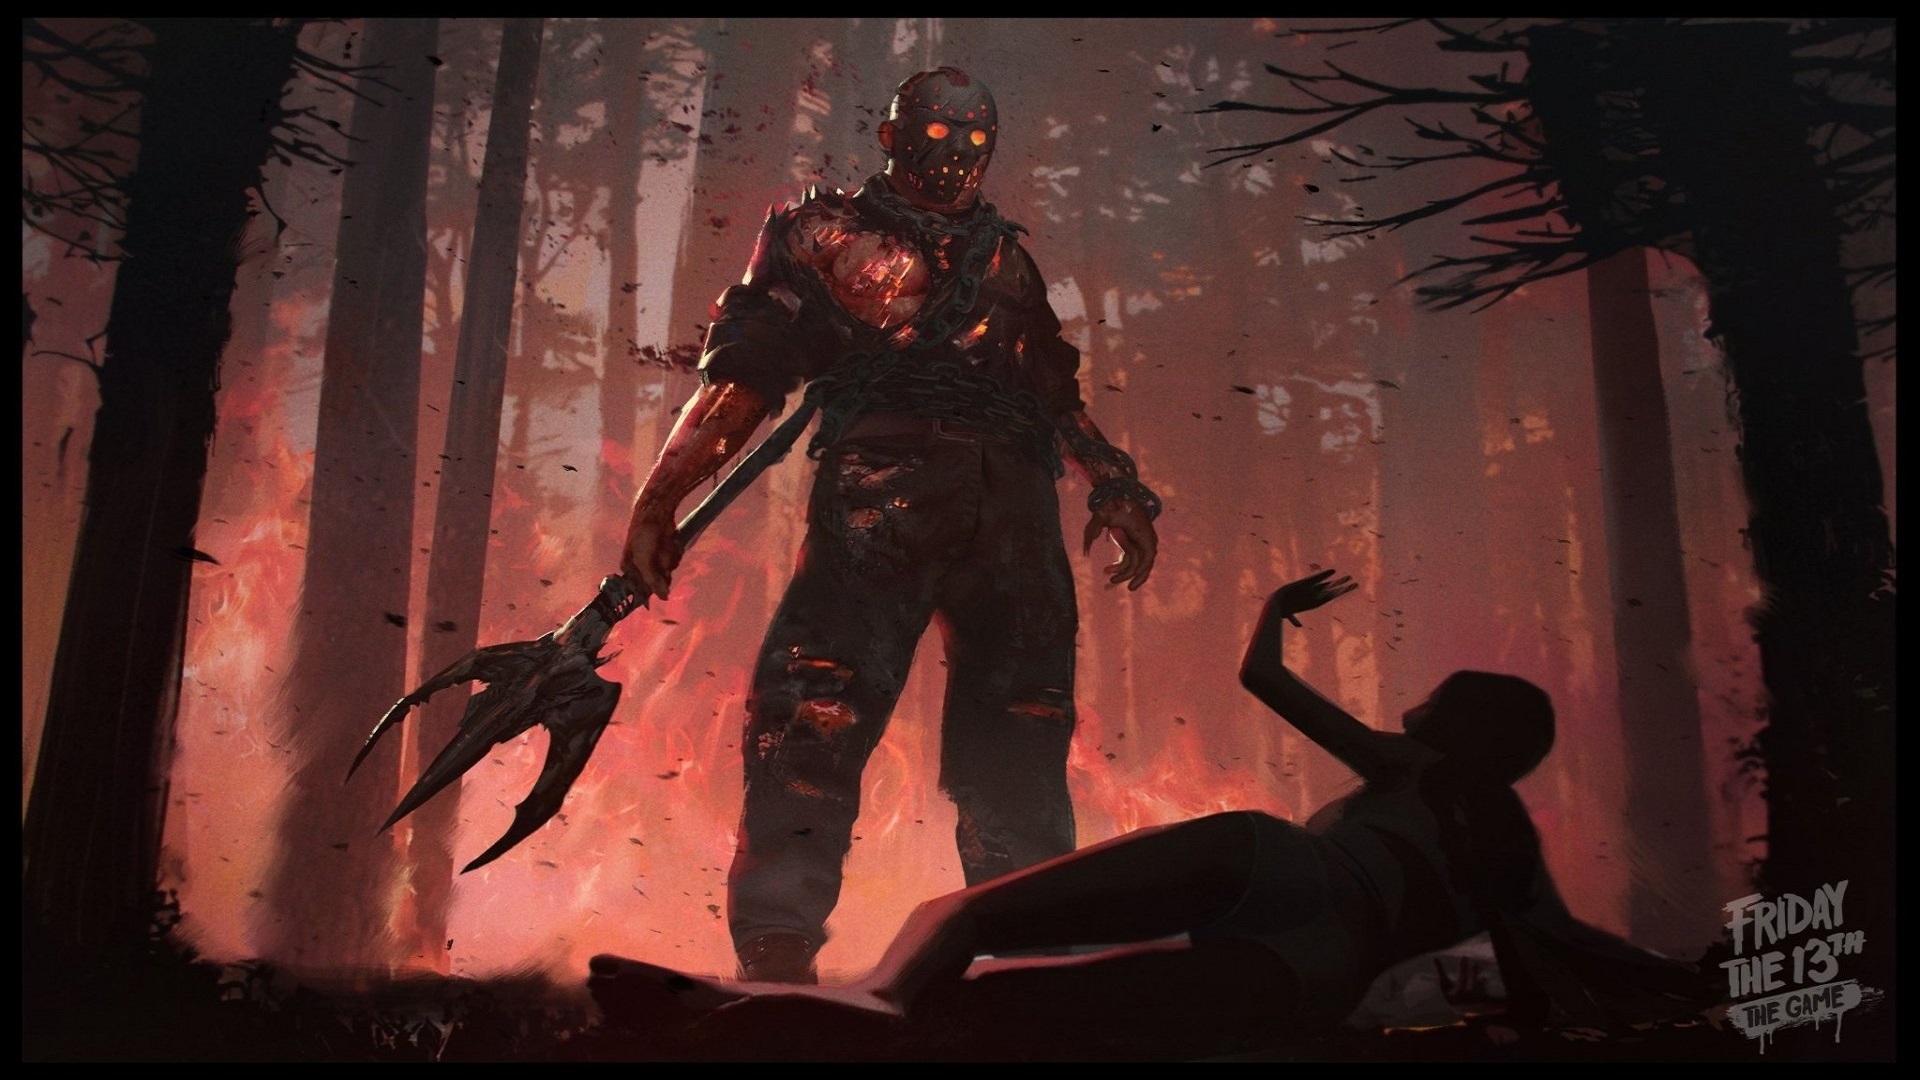 Friday The 13th The Game Hd Wallpapers Read Games Review Play